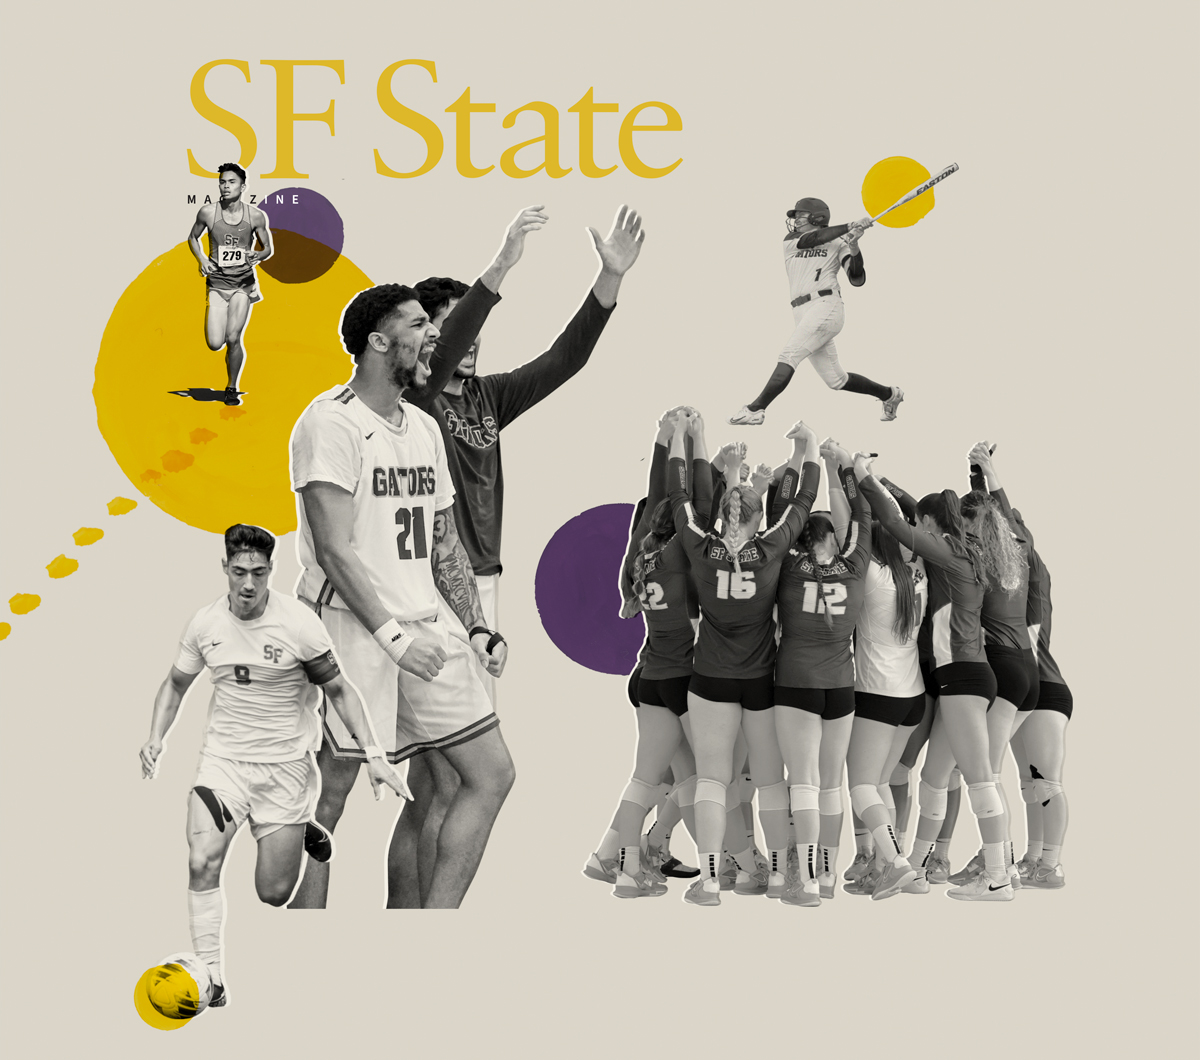 Athletes in a collage format. 2 Basketball players, a runner, a baseball player, a soccer player, and women's volleyball team.